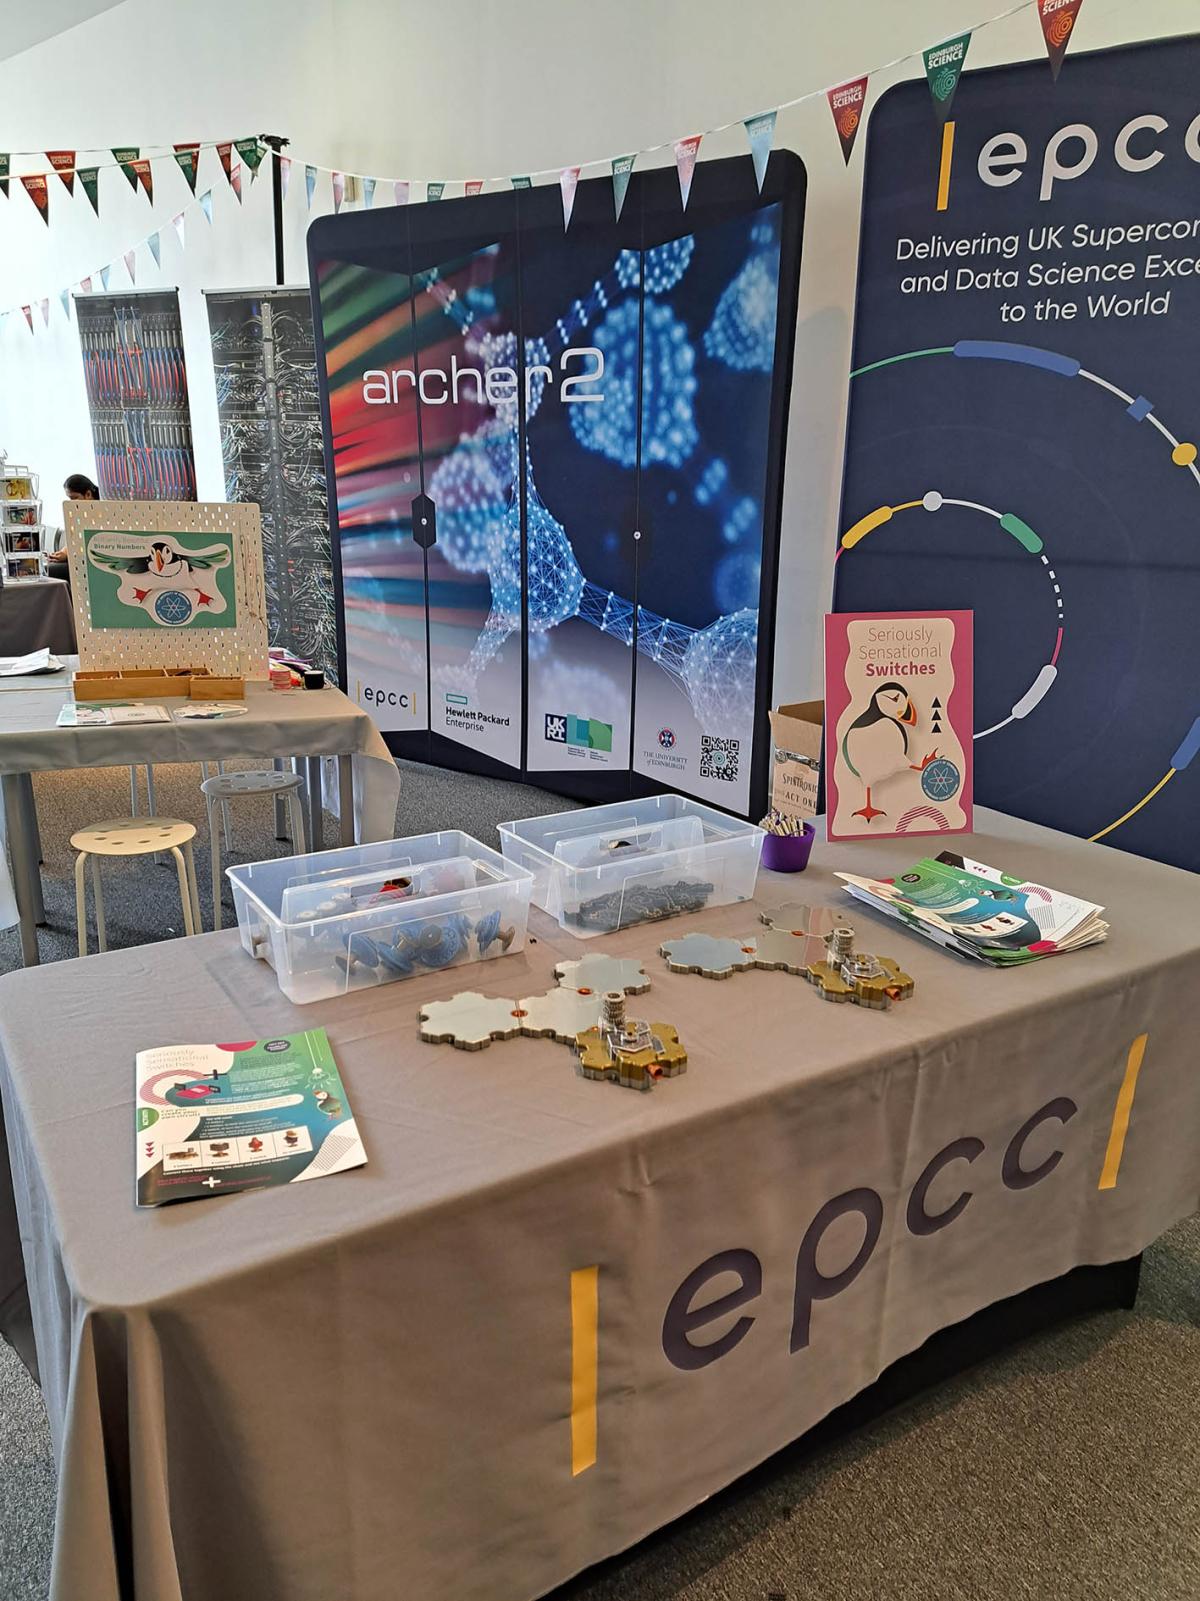 Exhibition stand with displays and "EPCC" tablecloth